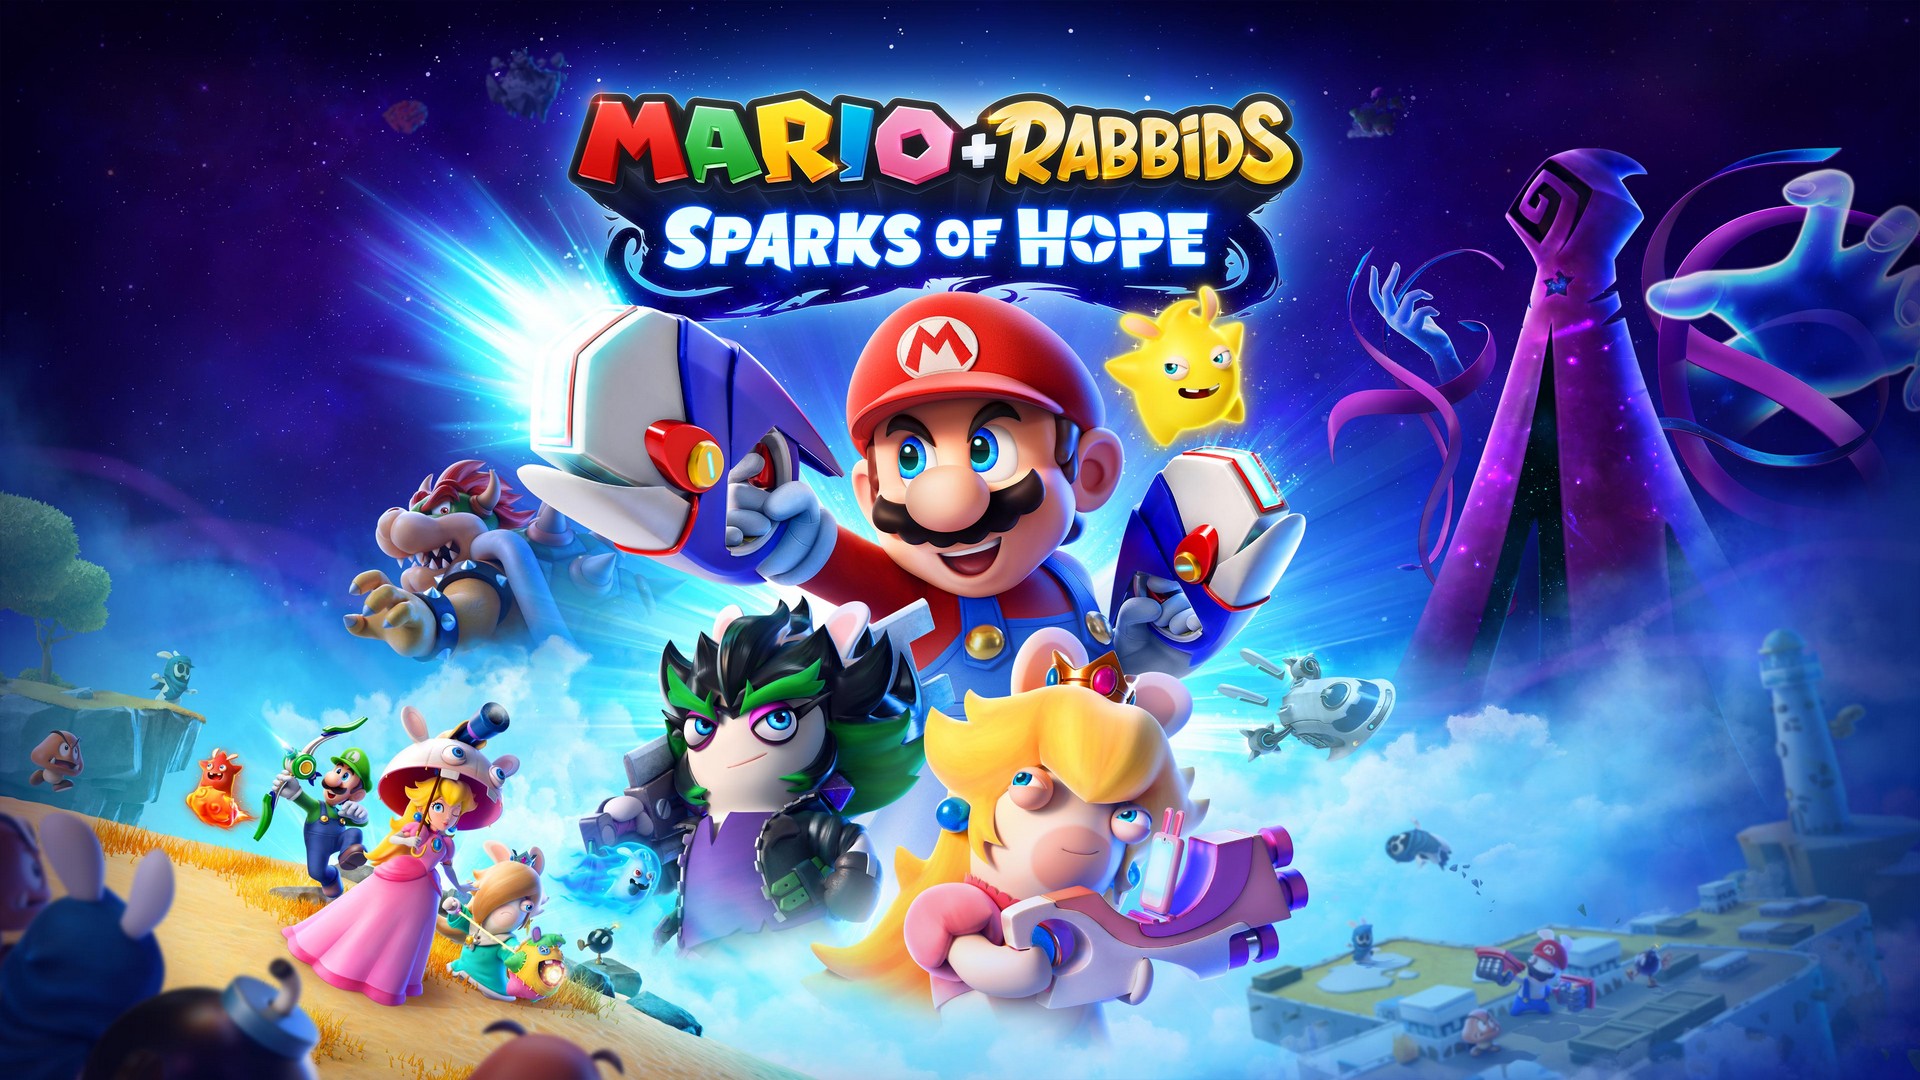 Save The Galaxy In Mario + Rabbids Sparks Of Hope – Available Now